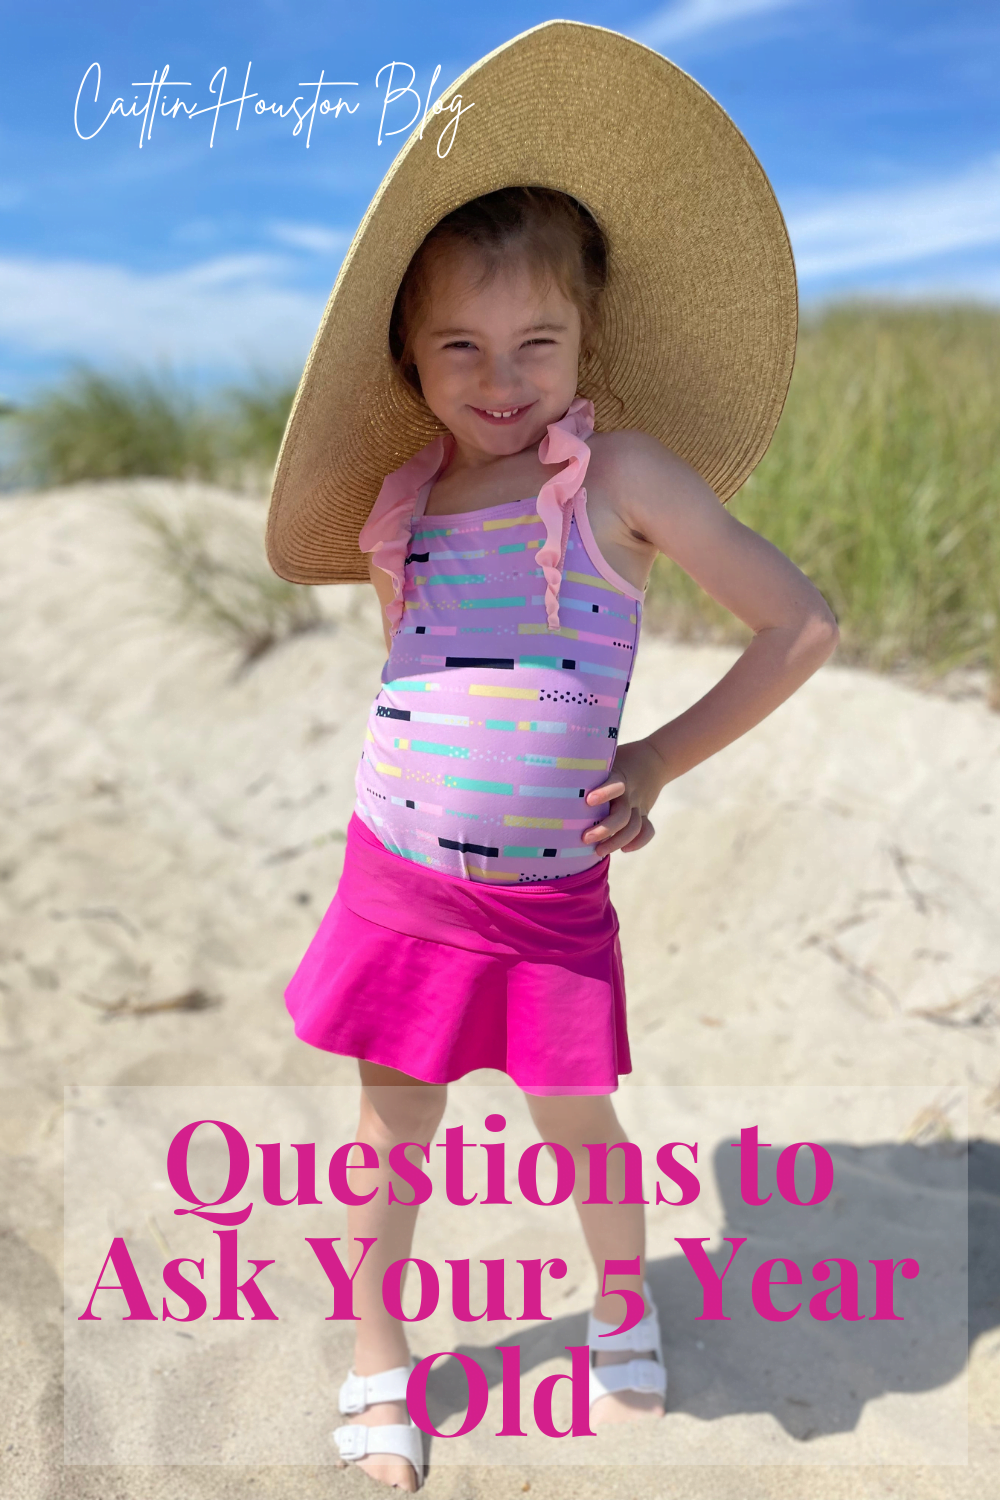 Questions to Ask Your 5 Year Old